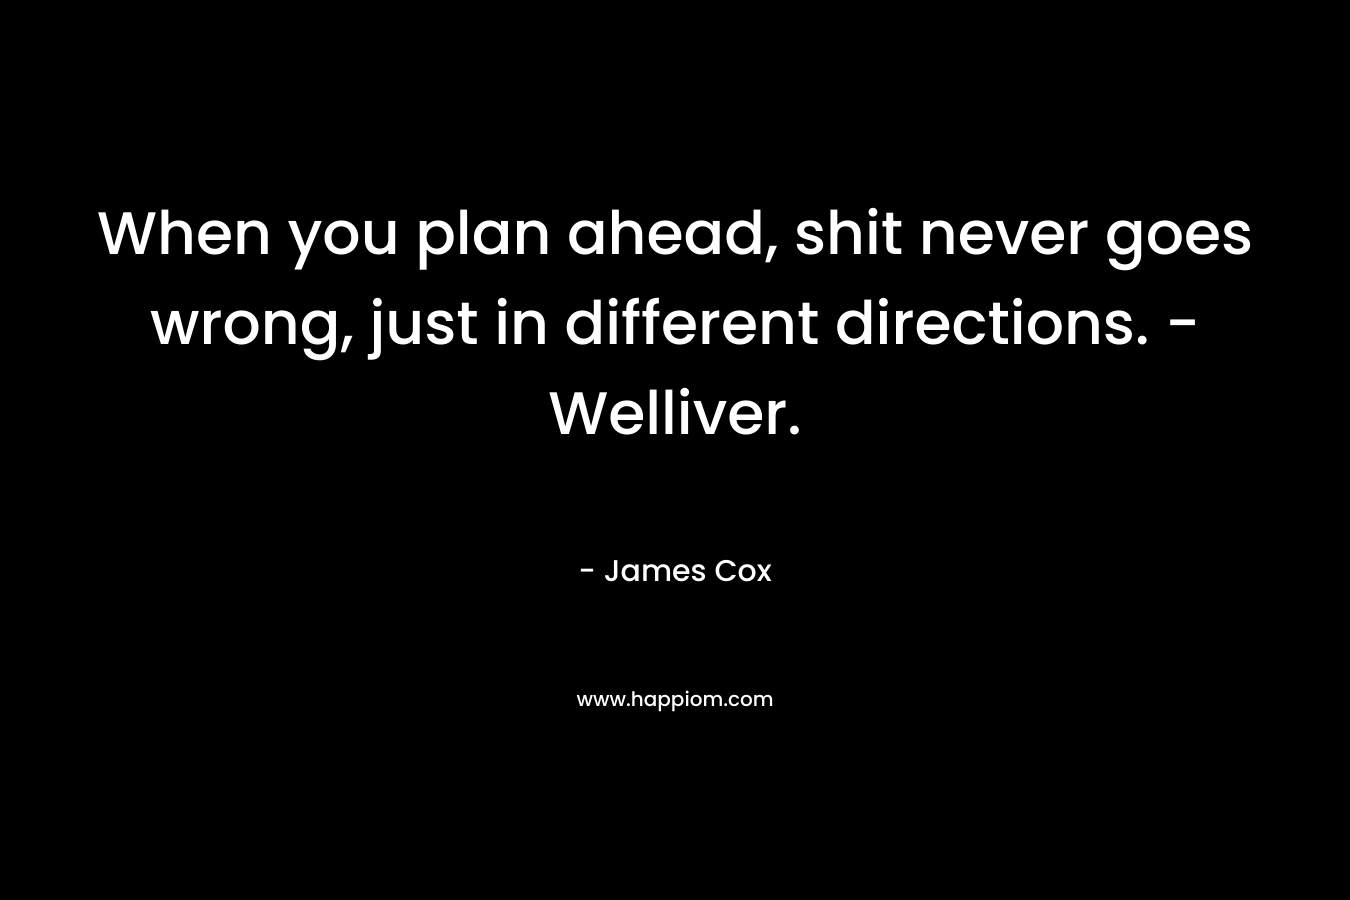 When you plan ahead, shit never goes wrong, just in different directions. - Welliver.